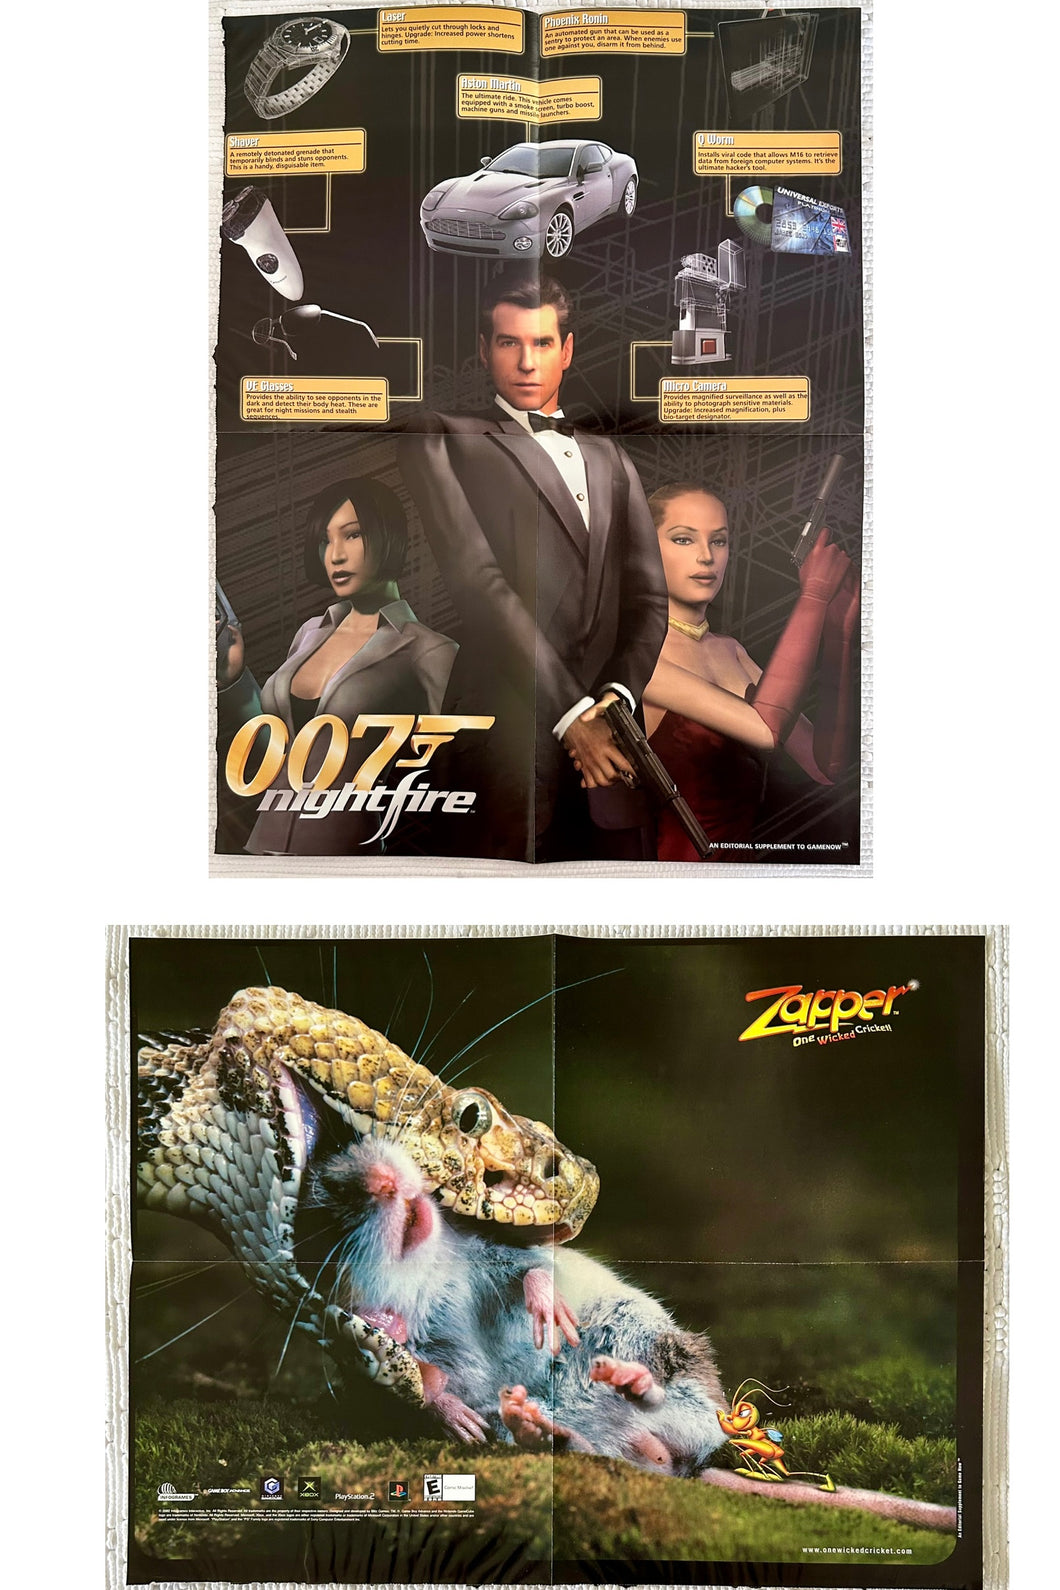 Zapper: One Wicked Cricket! / James Bond 007: Nightfire - PS2/NGC/Xbox - Vintage Double-sided Poster - Promo